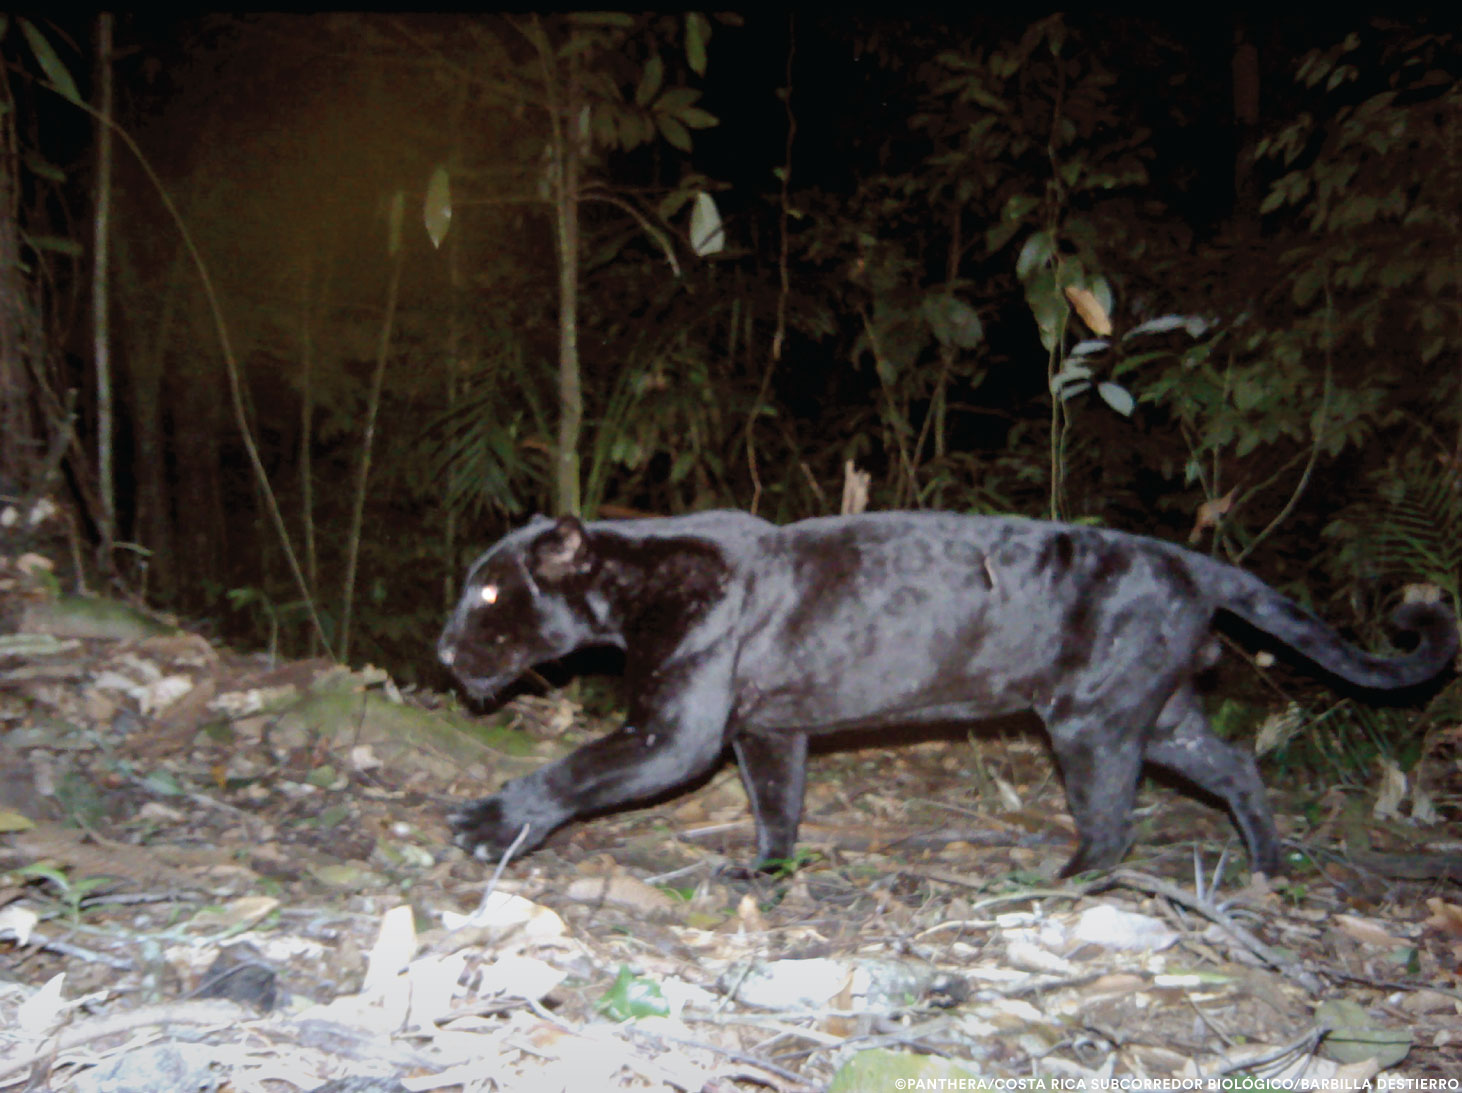 Black jaguar walking in the dark. You can see its spots under its dark coloring.